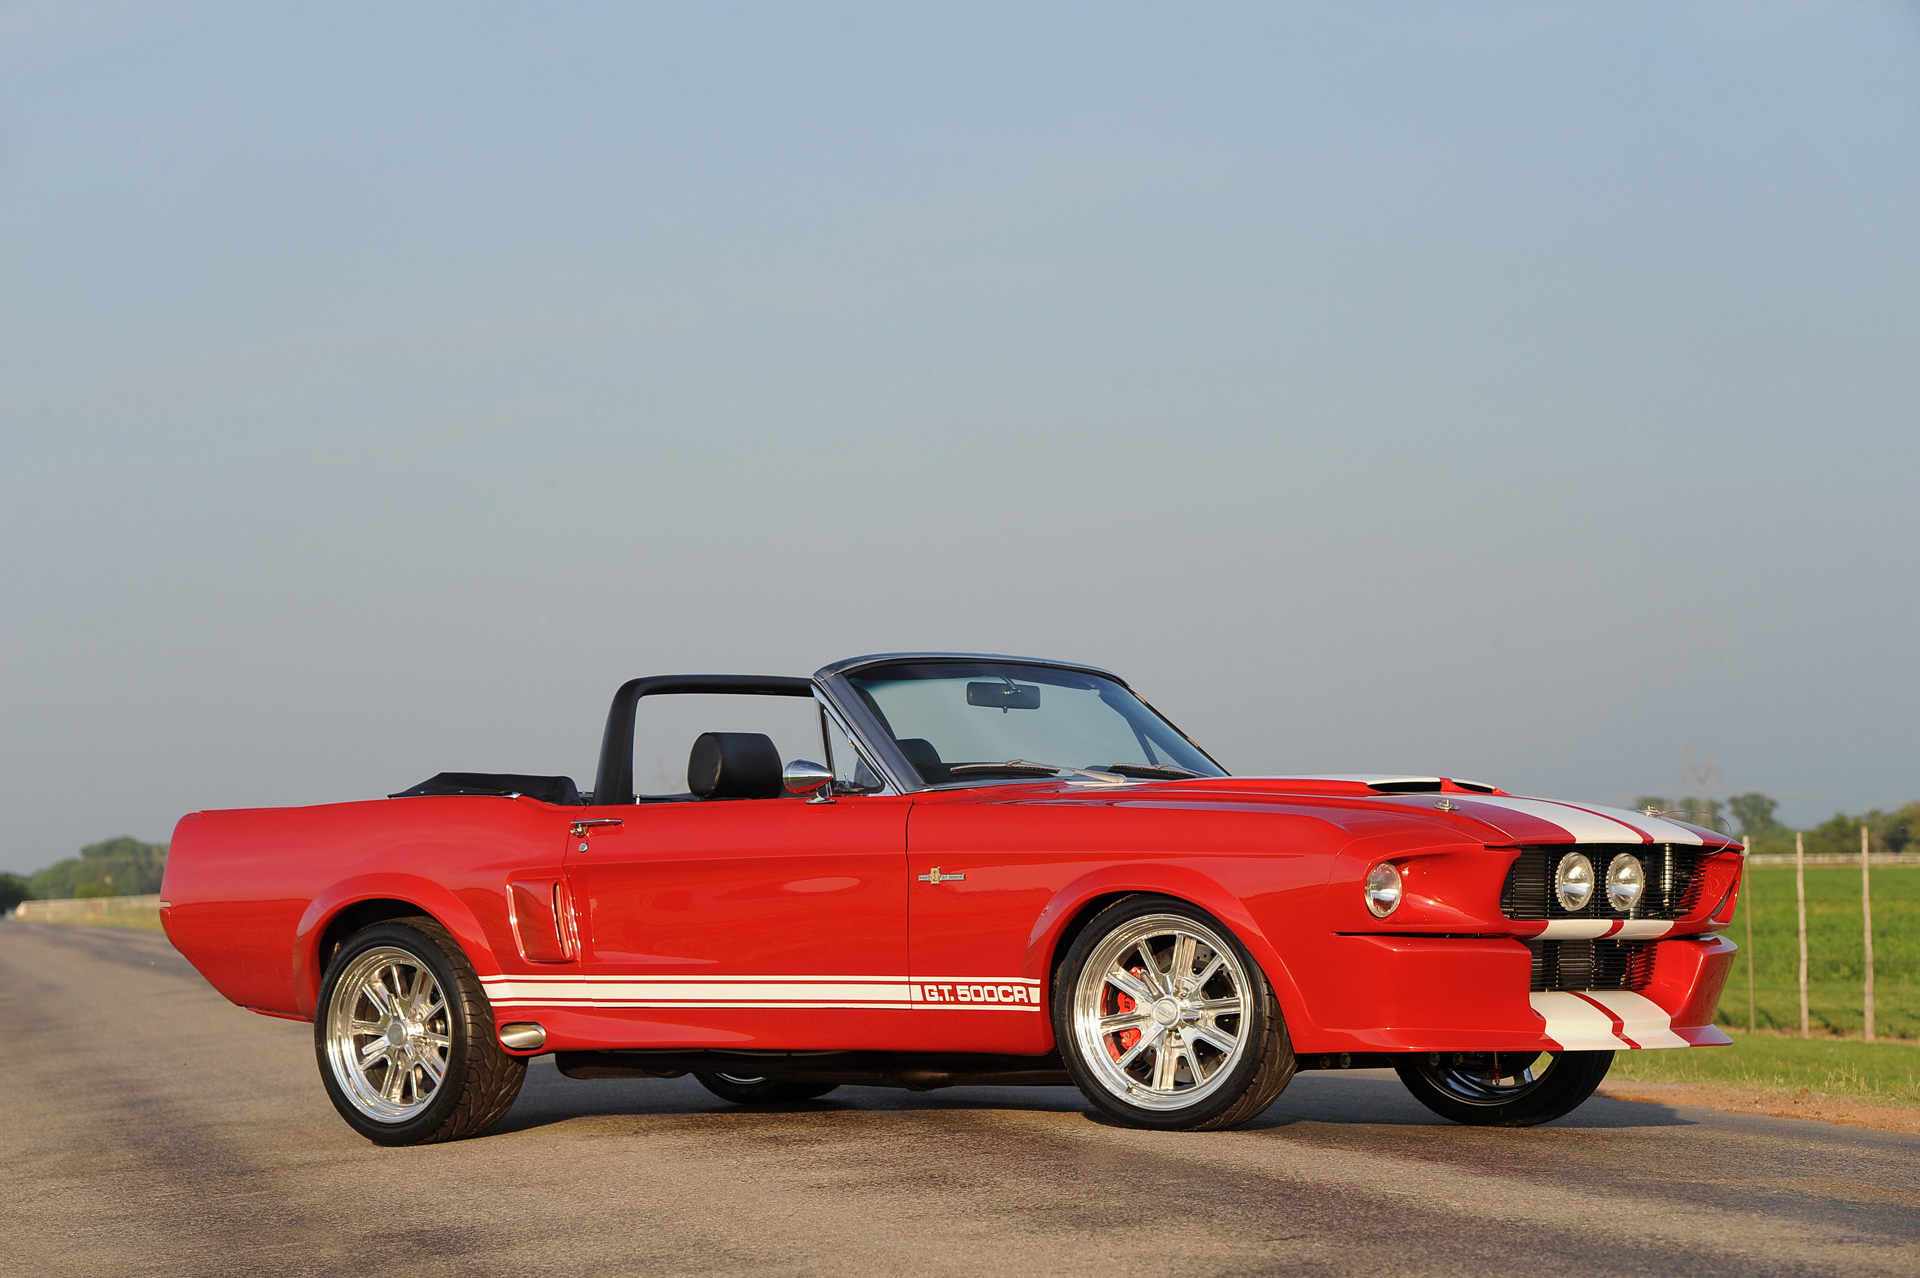 vertical wallpaper vehicles, shelby gt500 classic recreation, classic car, convertible, muscle car, ford